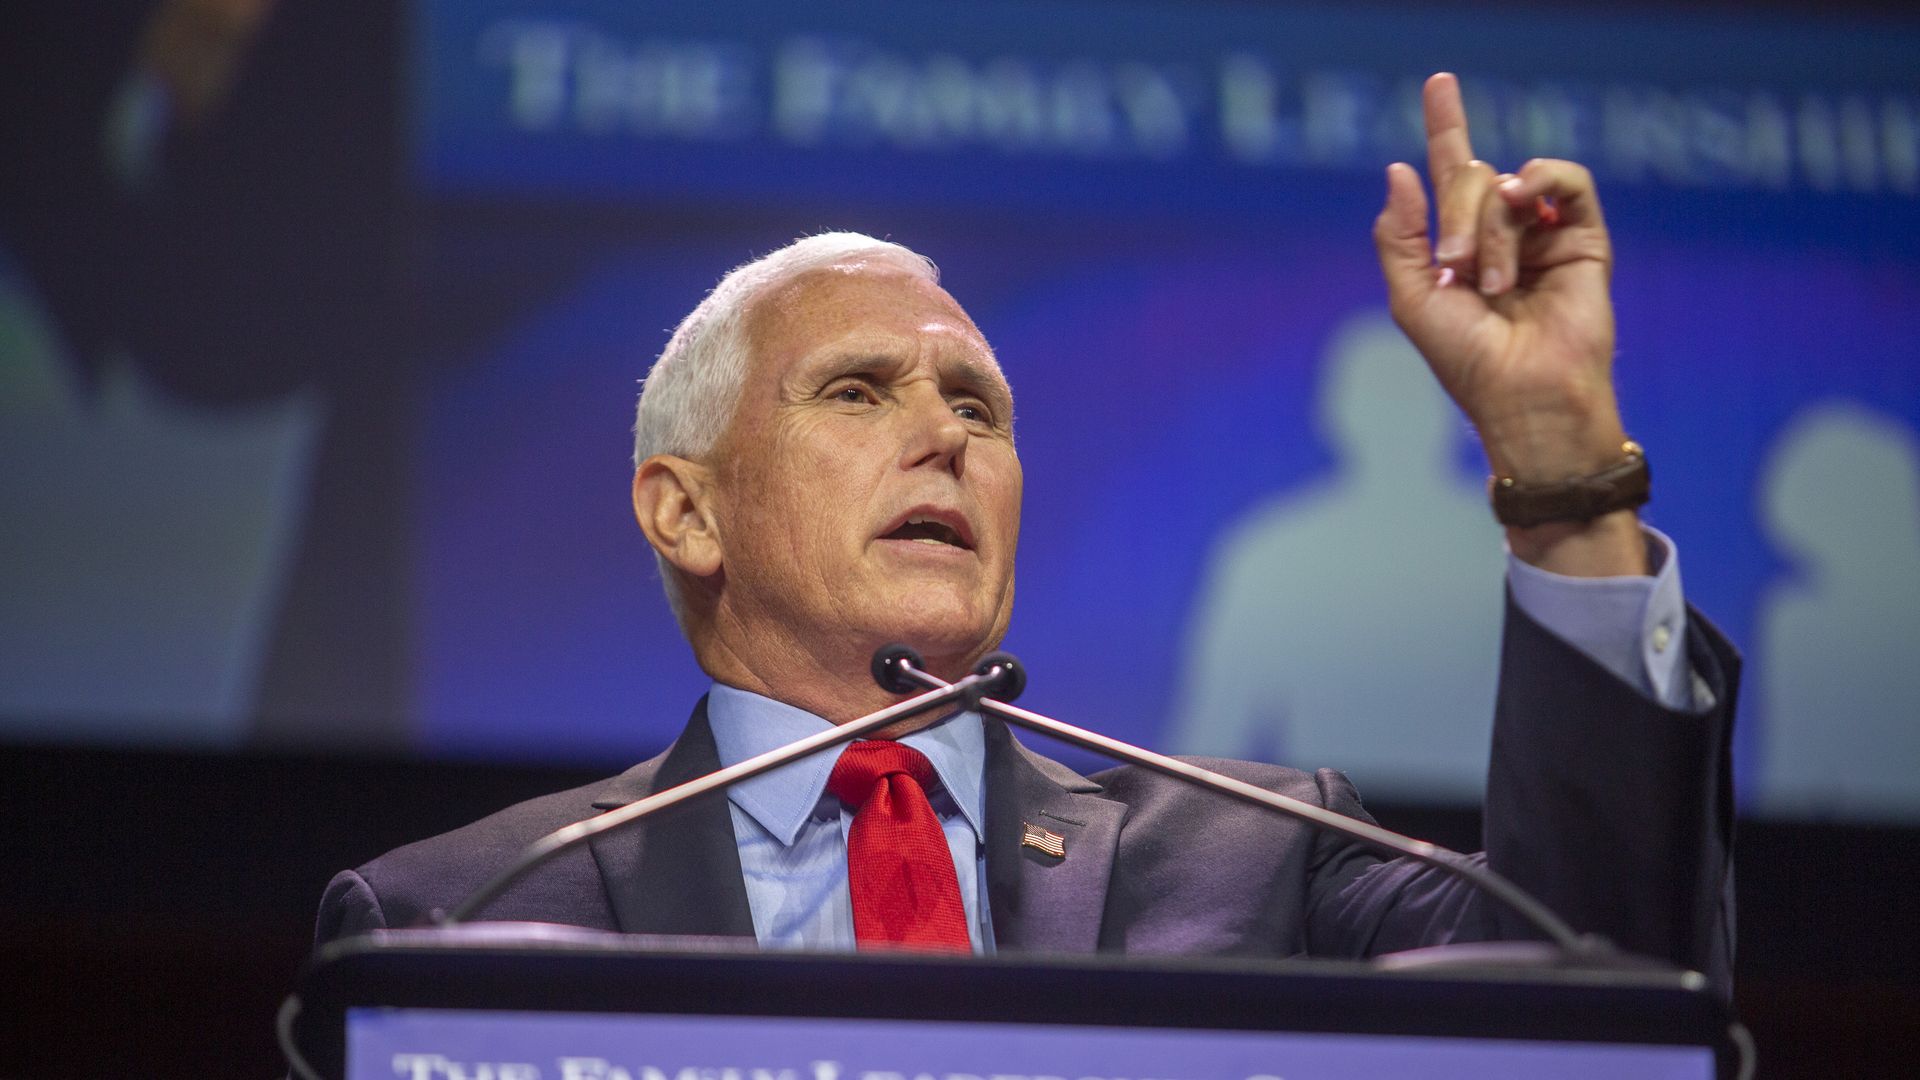 Former Vice President Mike Pence is seen speaking at a political event this summer.